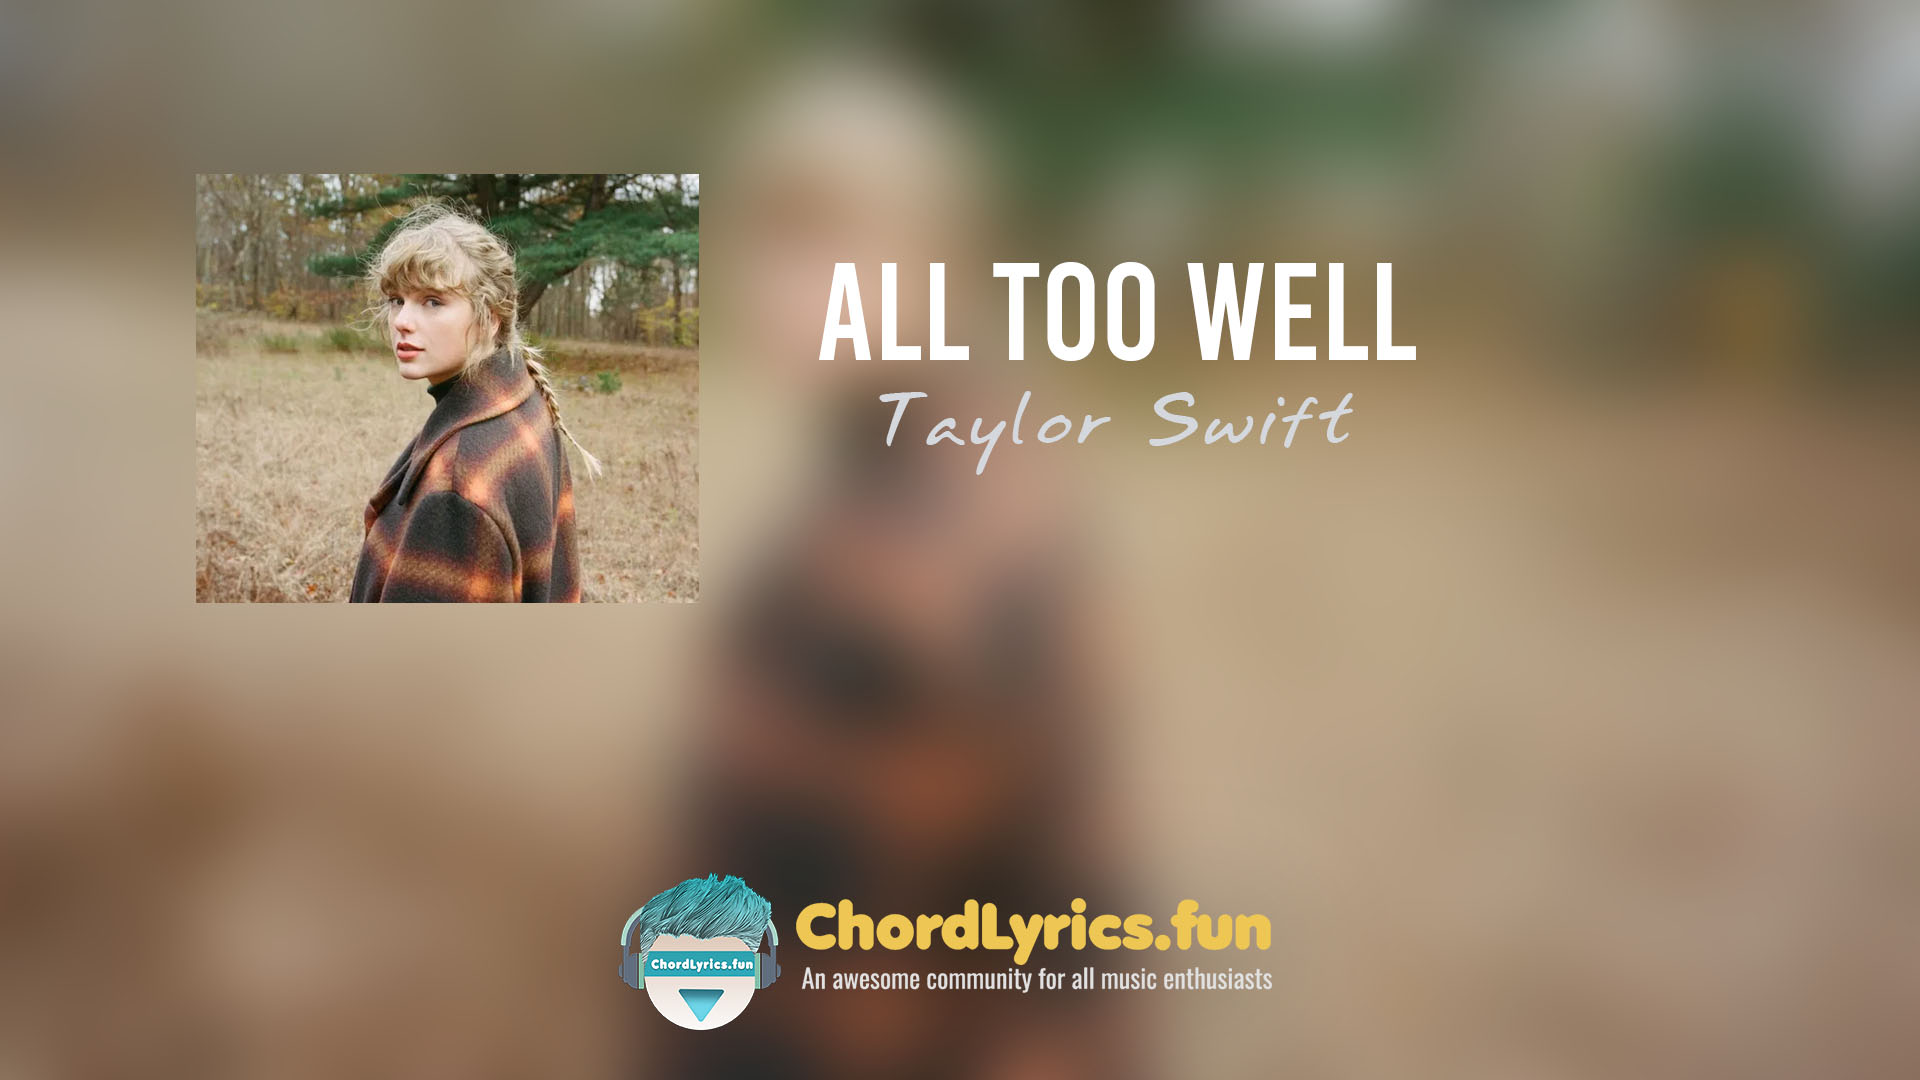 All too well taylor swift